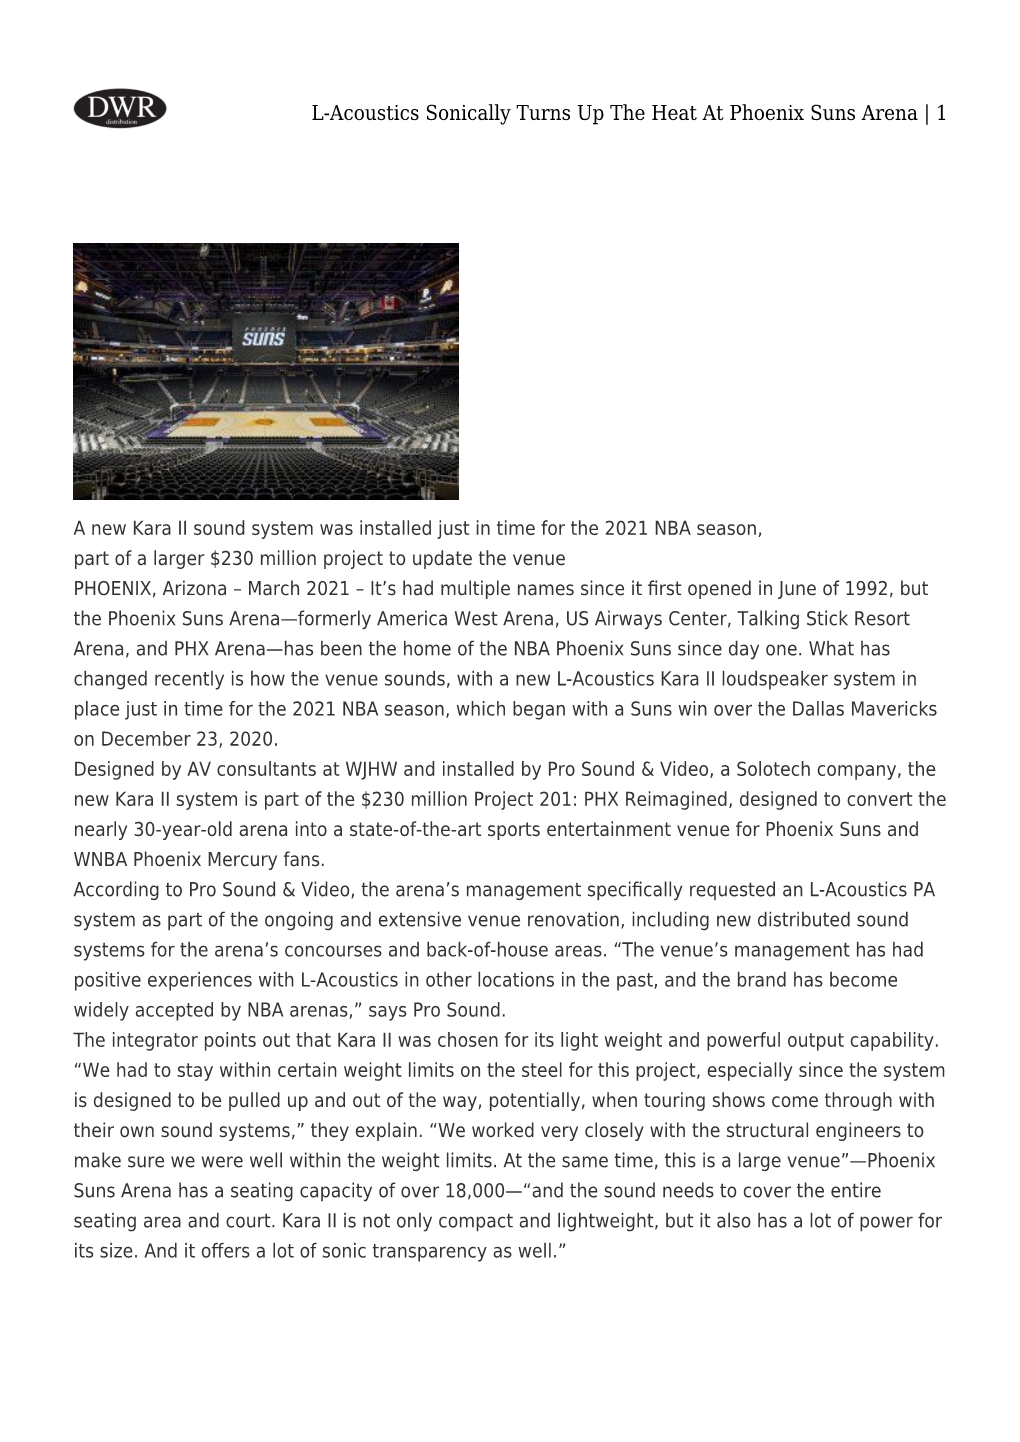 L-Acoustics Sonically Turns up the Heat at Phoenix Suns Arena | 1